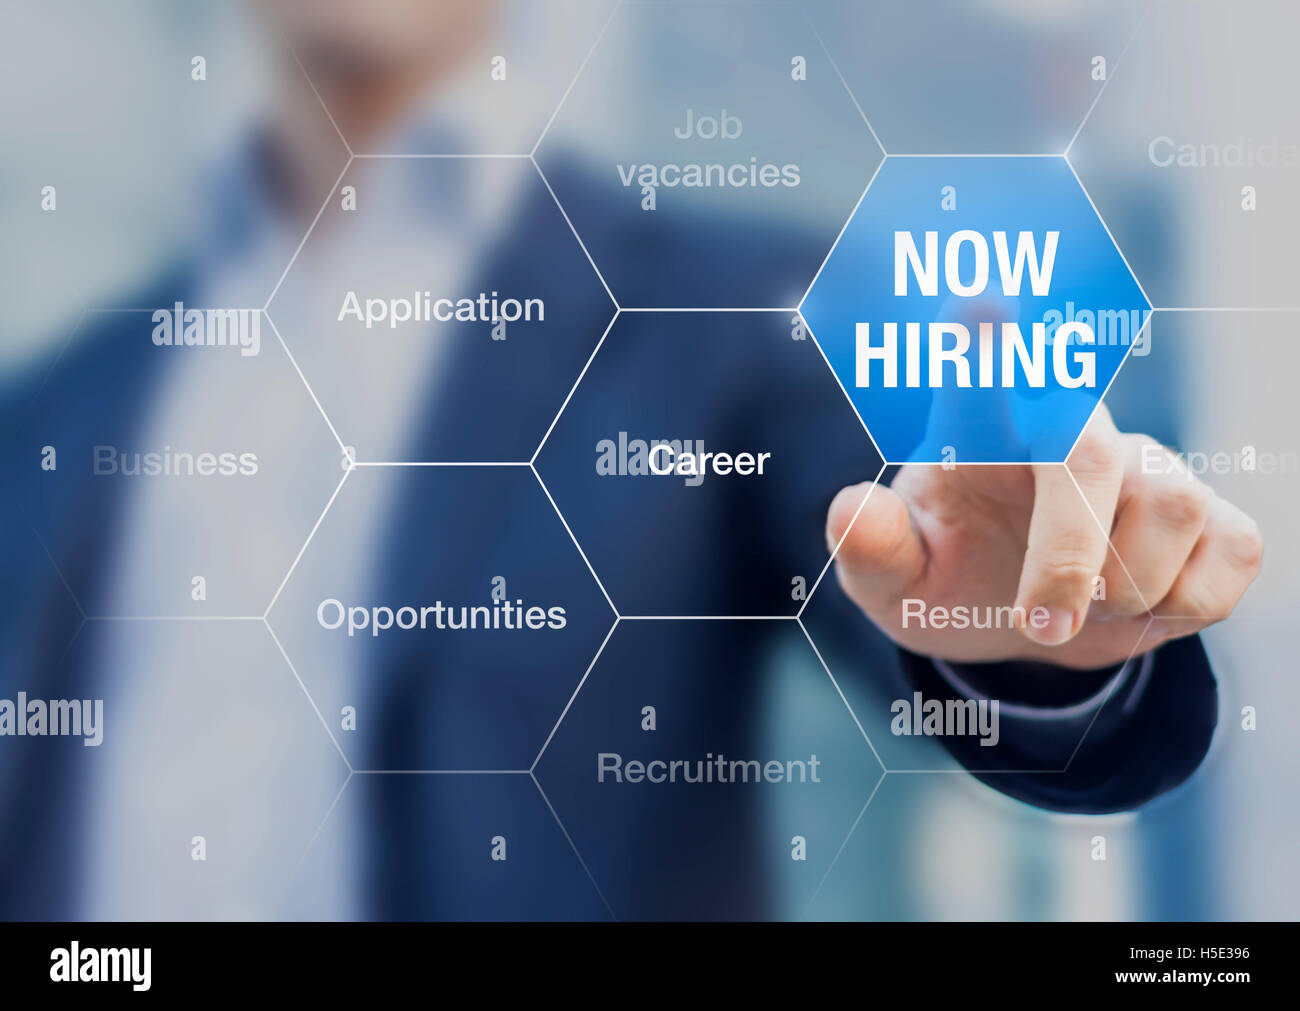 Recruiter advertising for job vacancies, searching candidates to hire for business opportunities Stock Photo